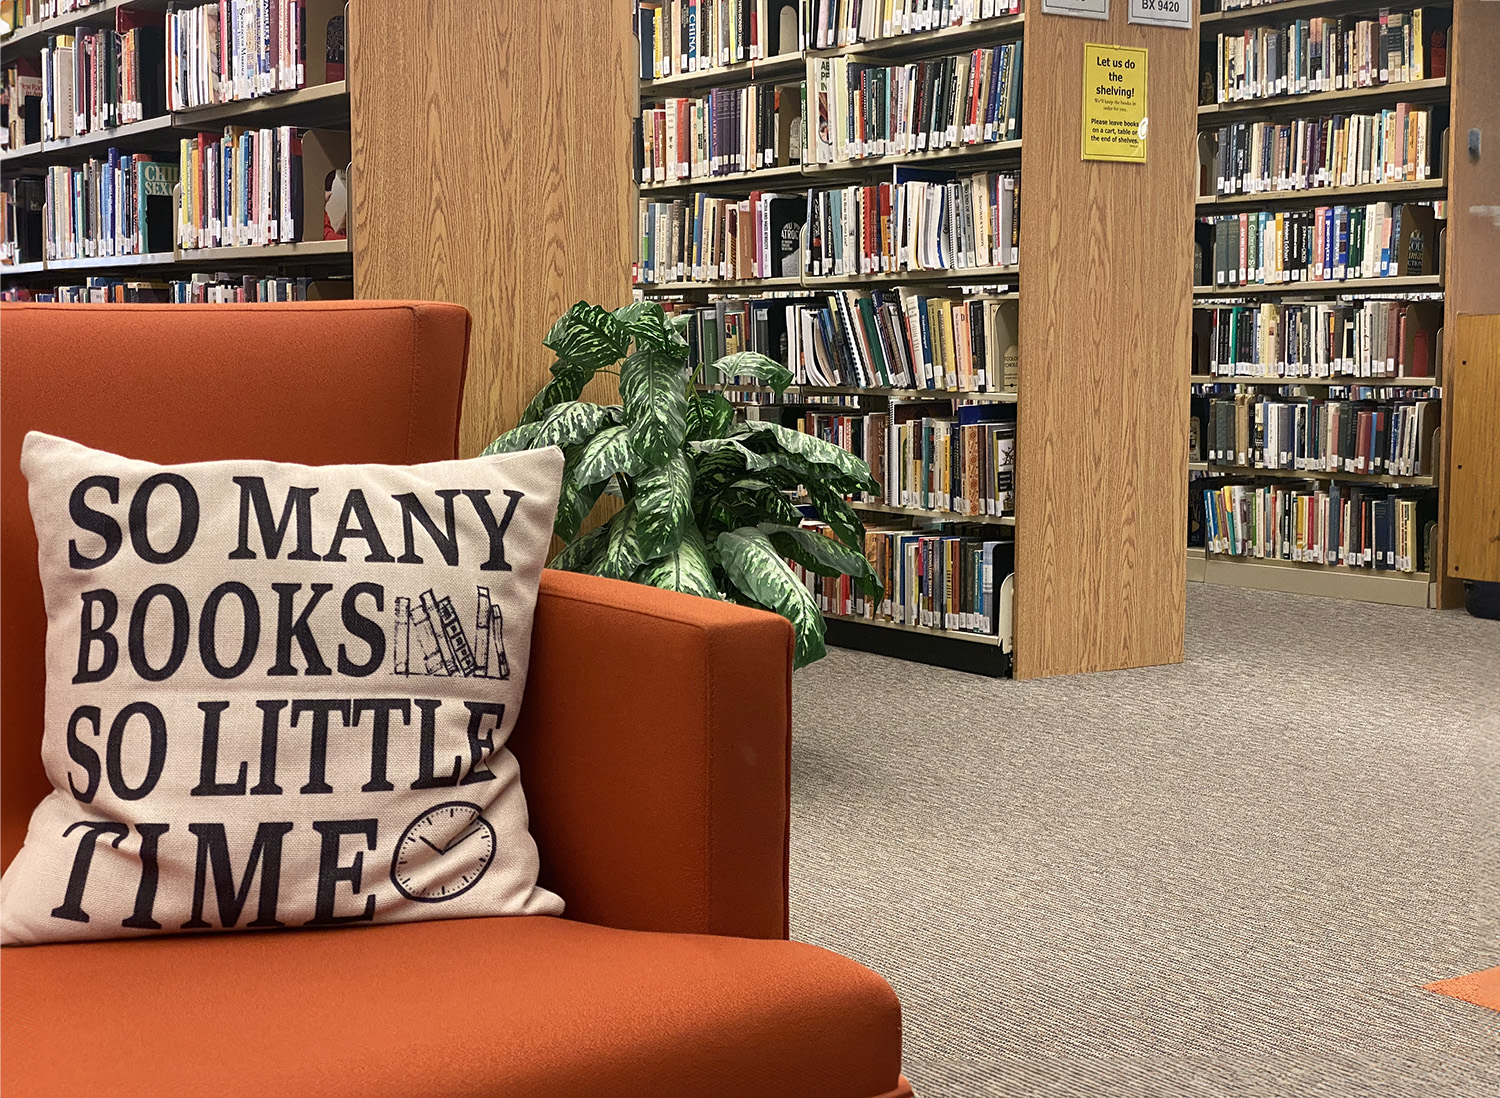 A chair with a pillow with text that says "So many books, so little time" with library shelves in the background